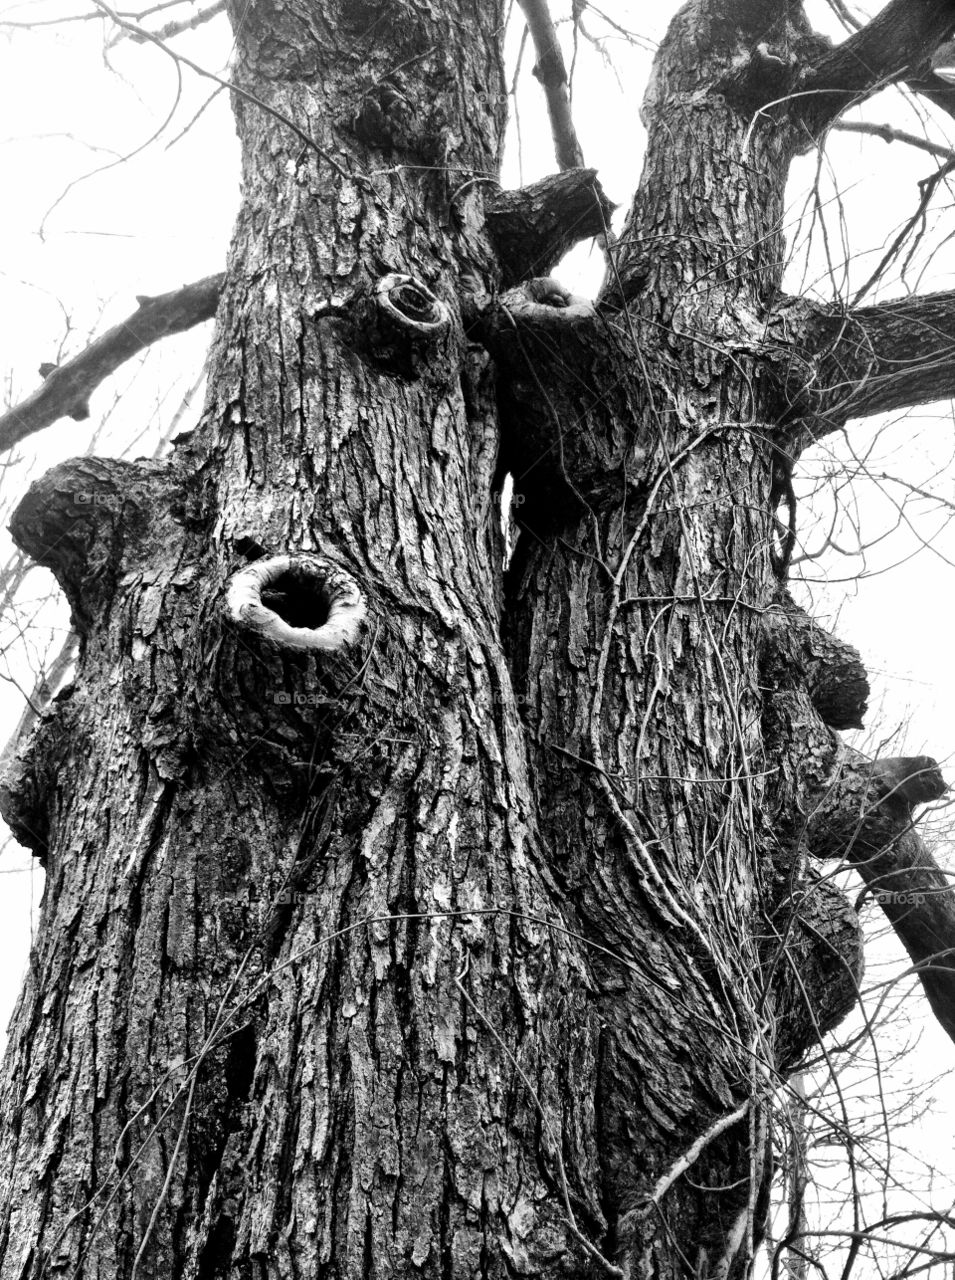 Scary Tree. This ancient looking tree is home to many creatures. 